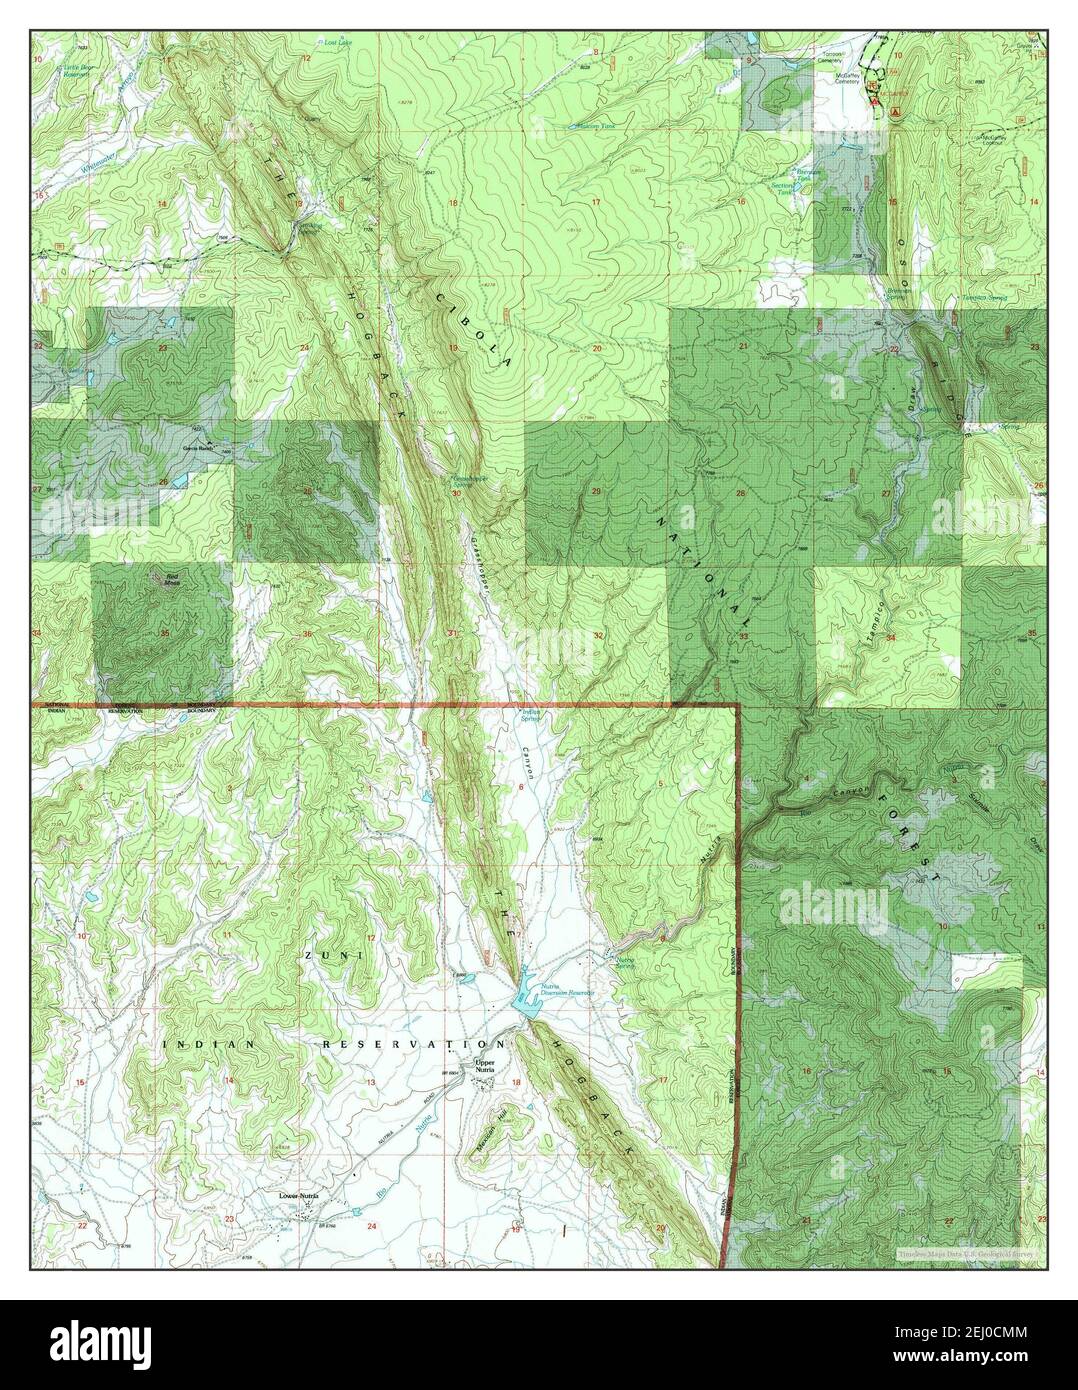 Upper Nutria, New Mexico, map 1995, 1:24000, United States of America by Timeless Maps, data U.S. Geological Survey Foto Stock